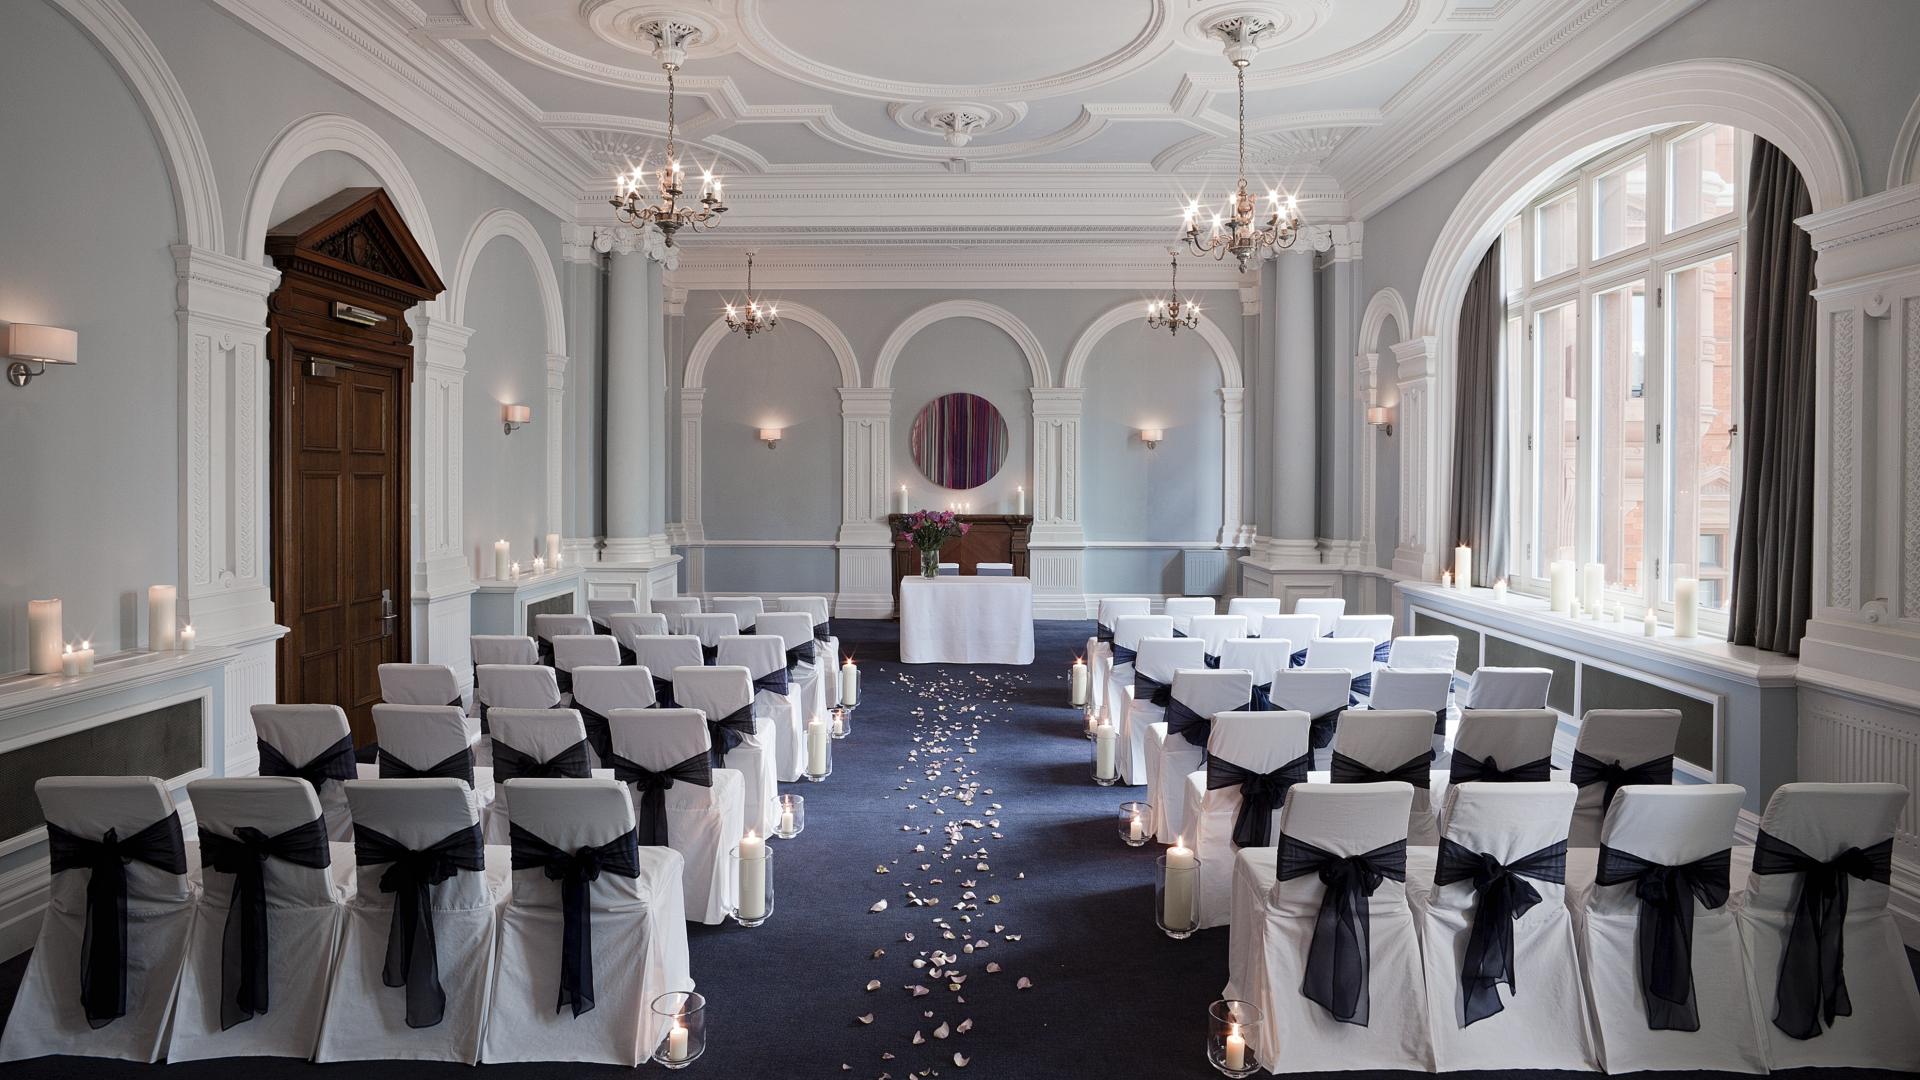 Civil Wedding Ceremony Venues for Hire in London